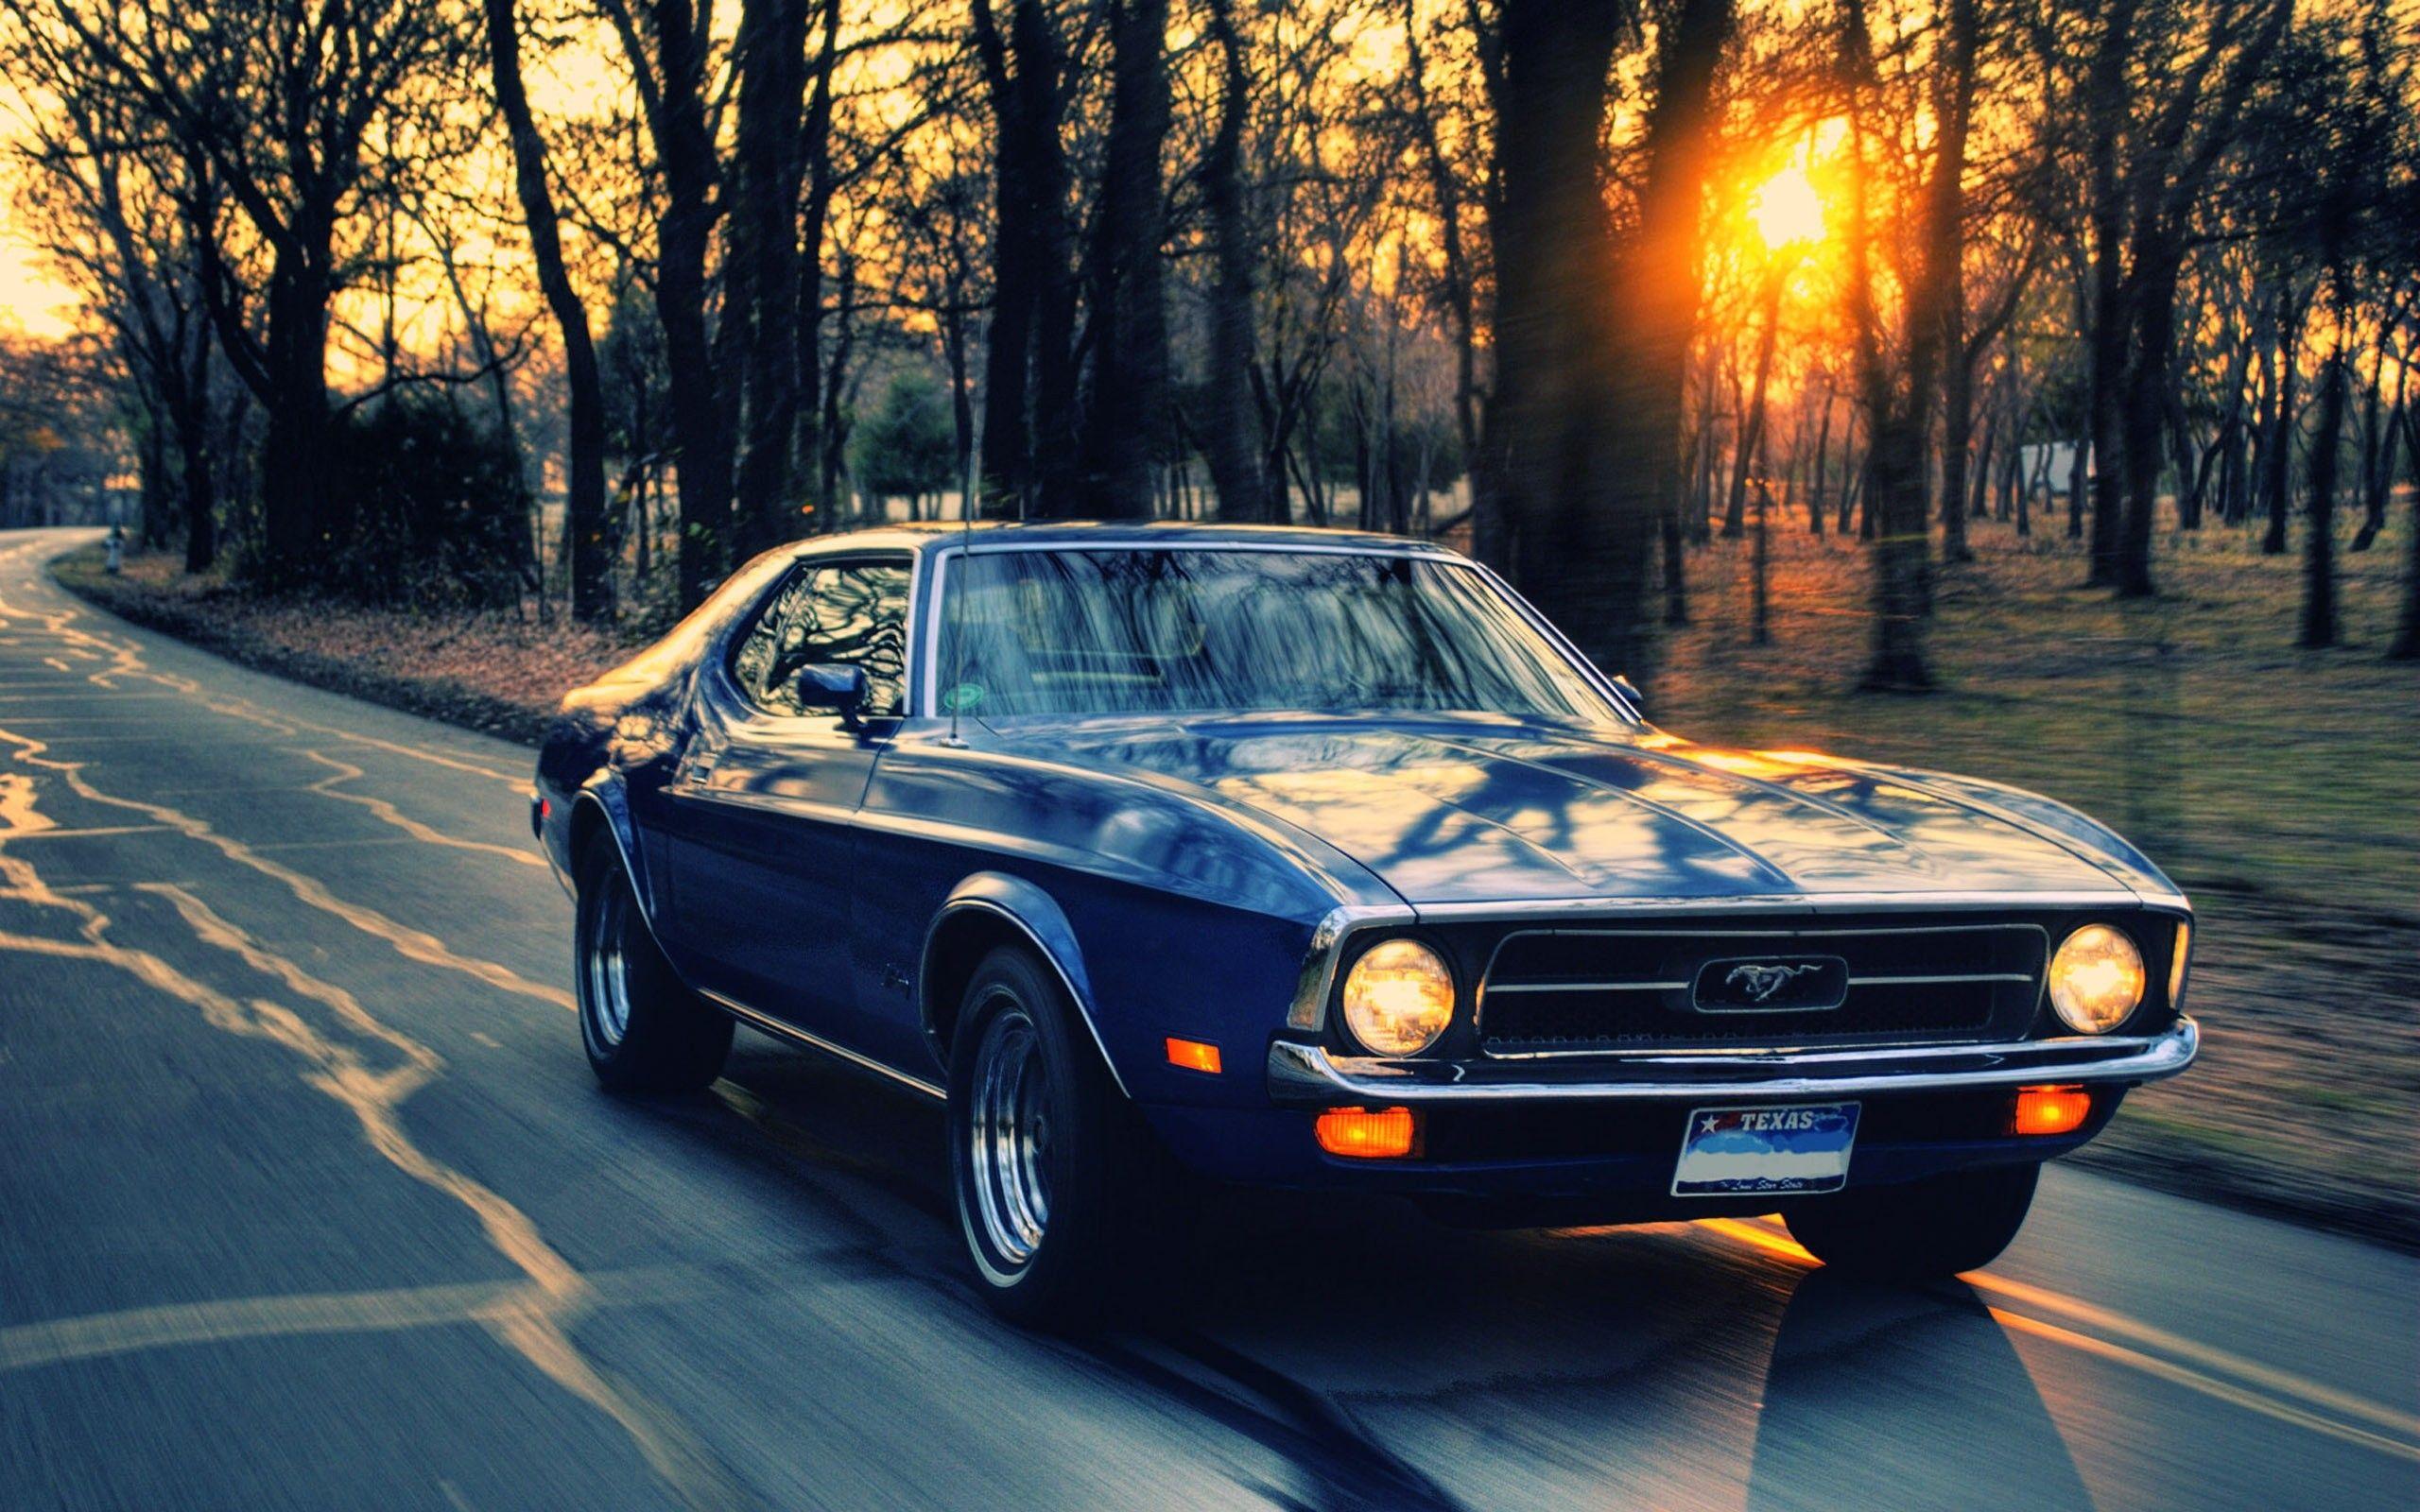 sunset, sunrise, trees, Ford, roads, Ford Mustang, driving, old